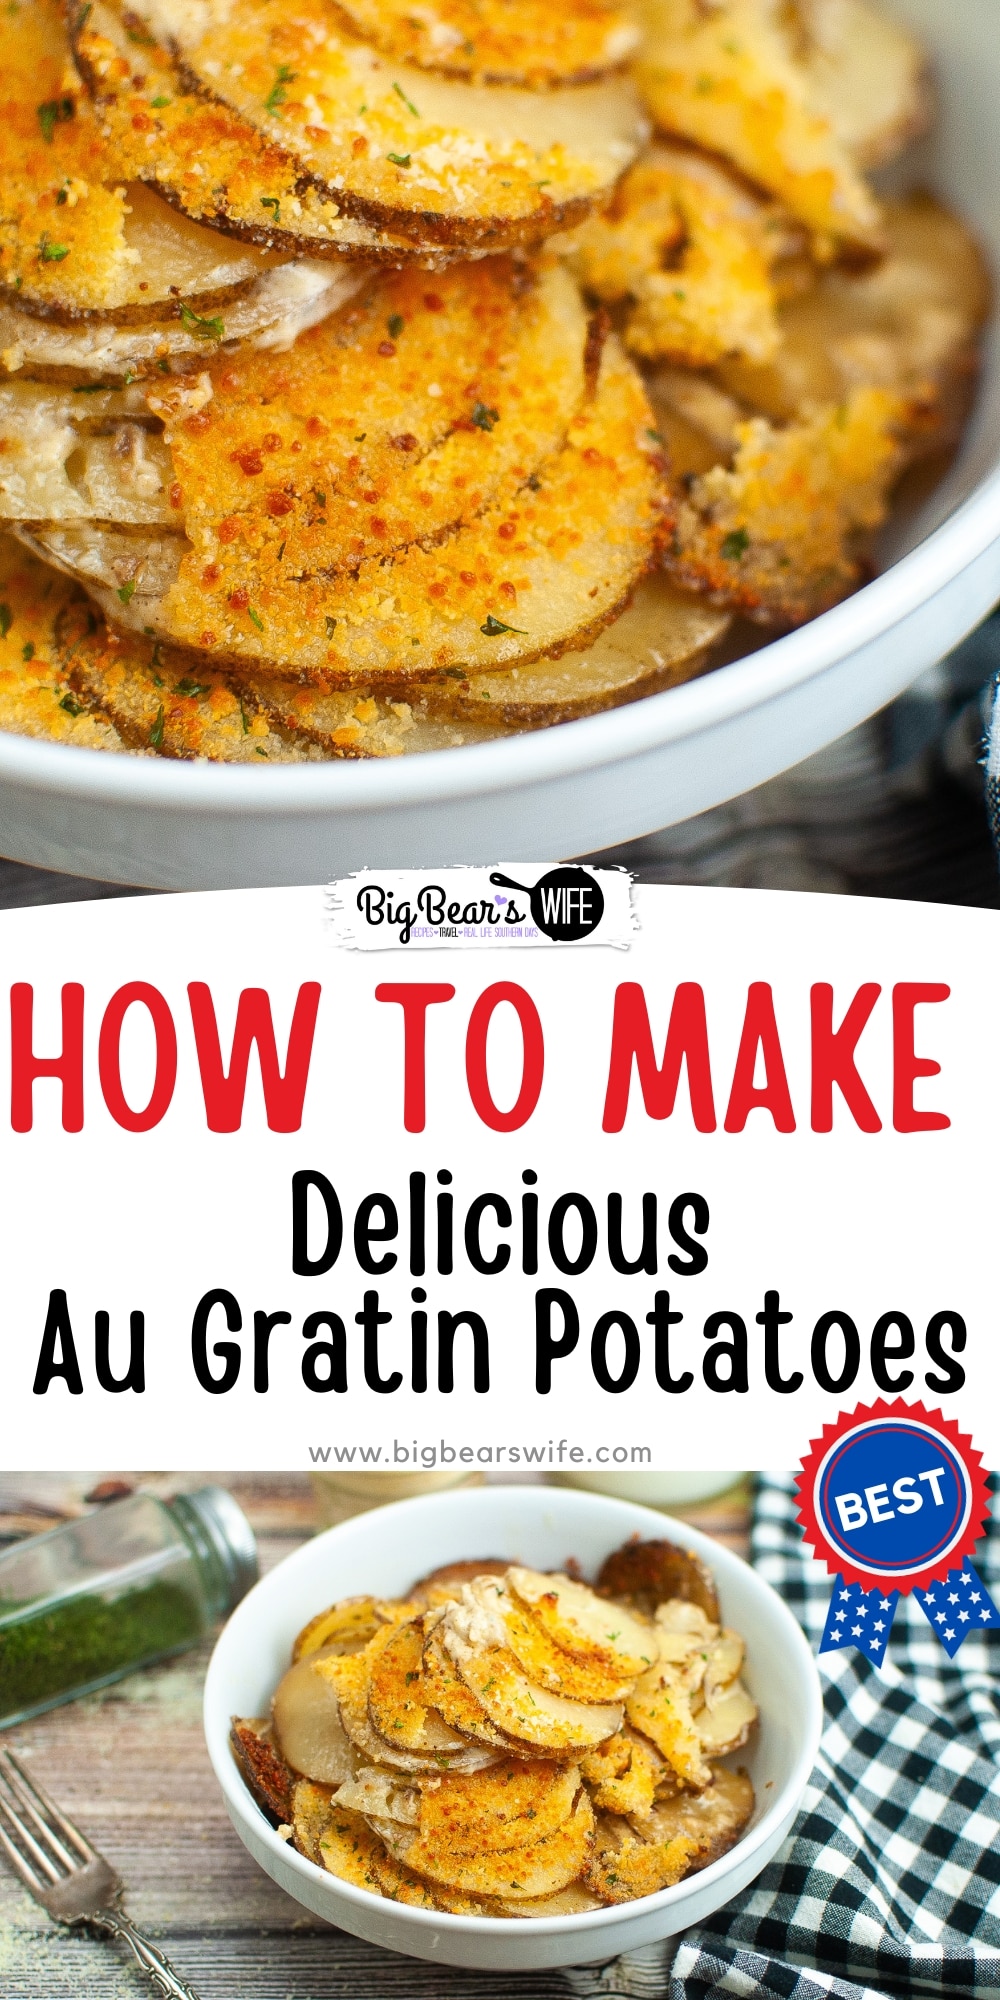 Need a new side dish for dinner? Tired of the same ol' sides that rotate through the dinner menu? Give these Au Gratin Potatoes a try to change it up some!  via @bigbearswife